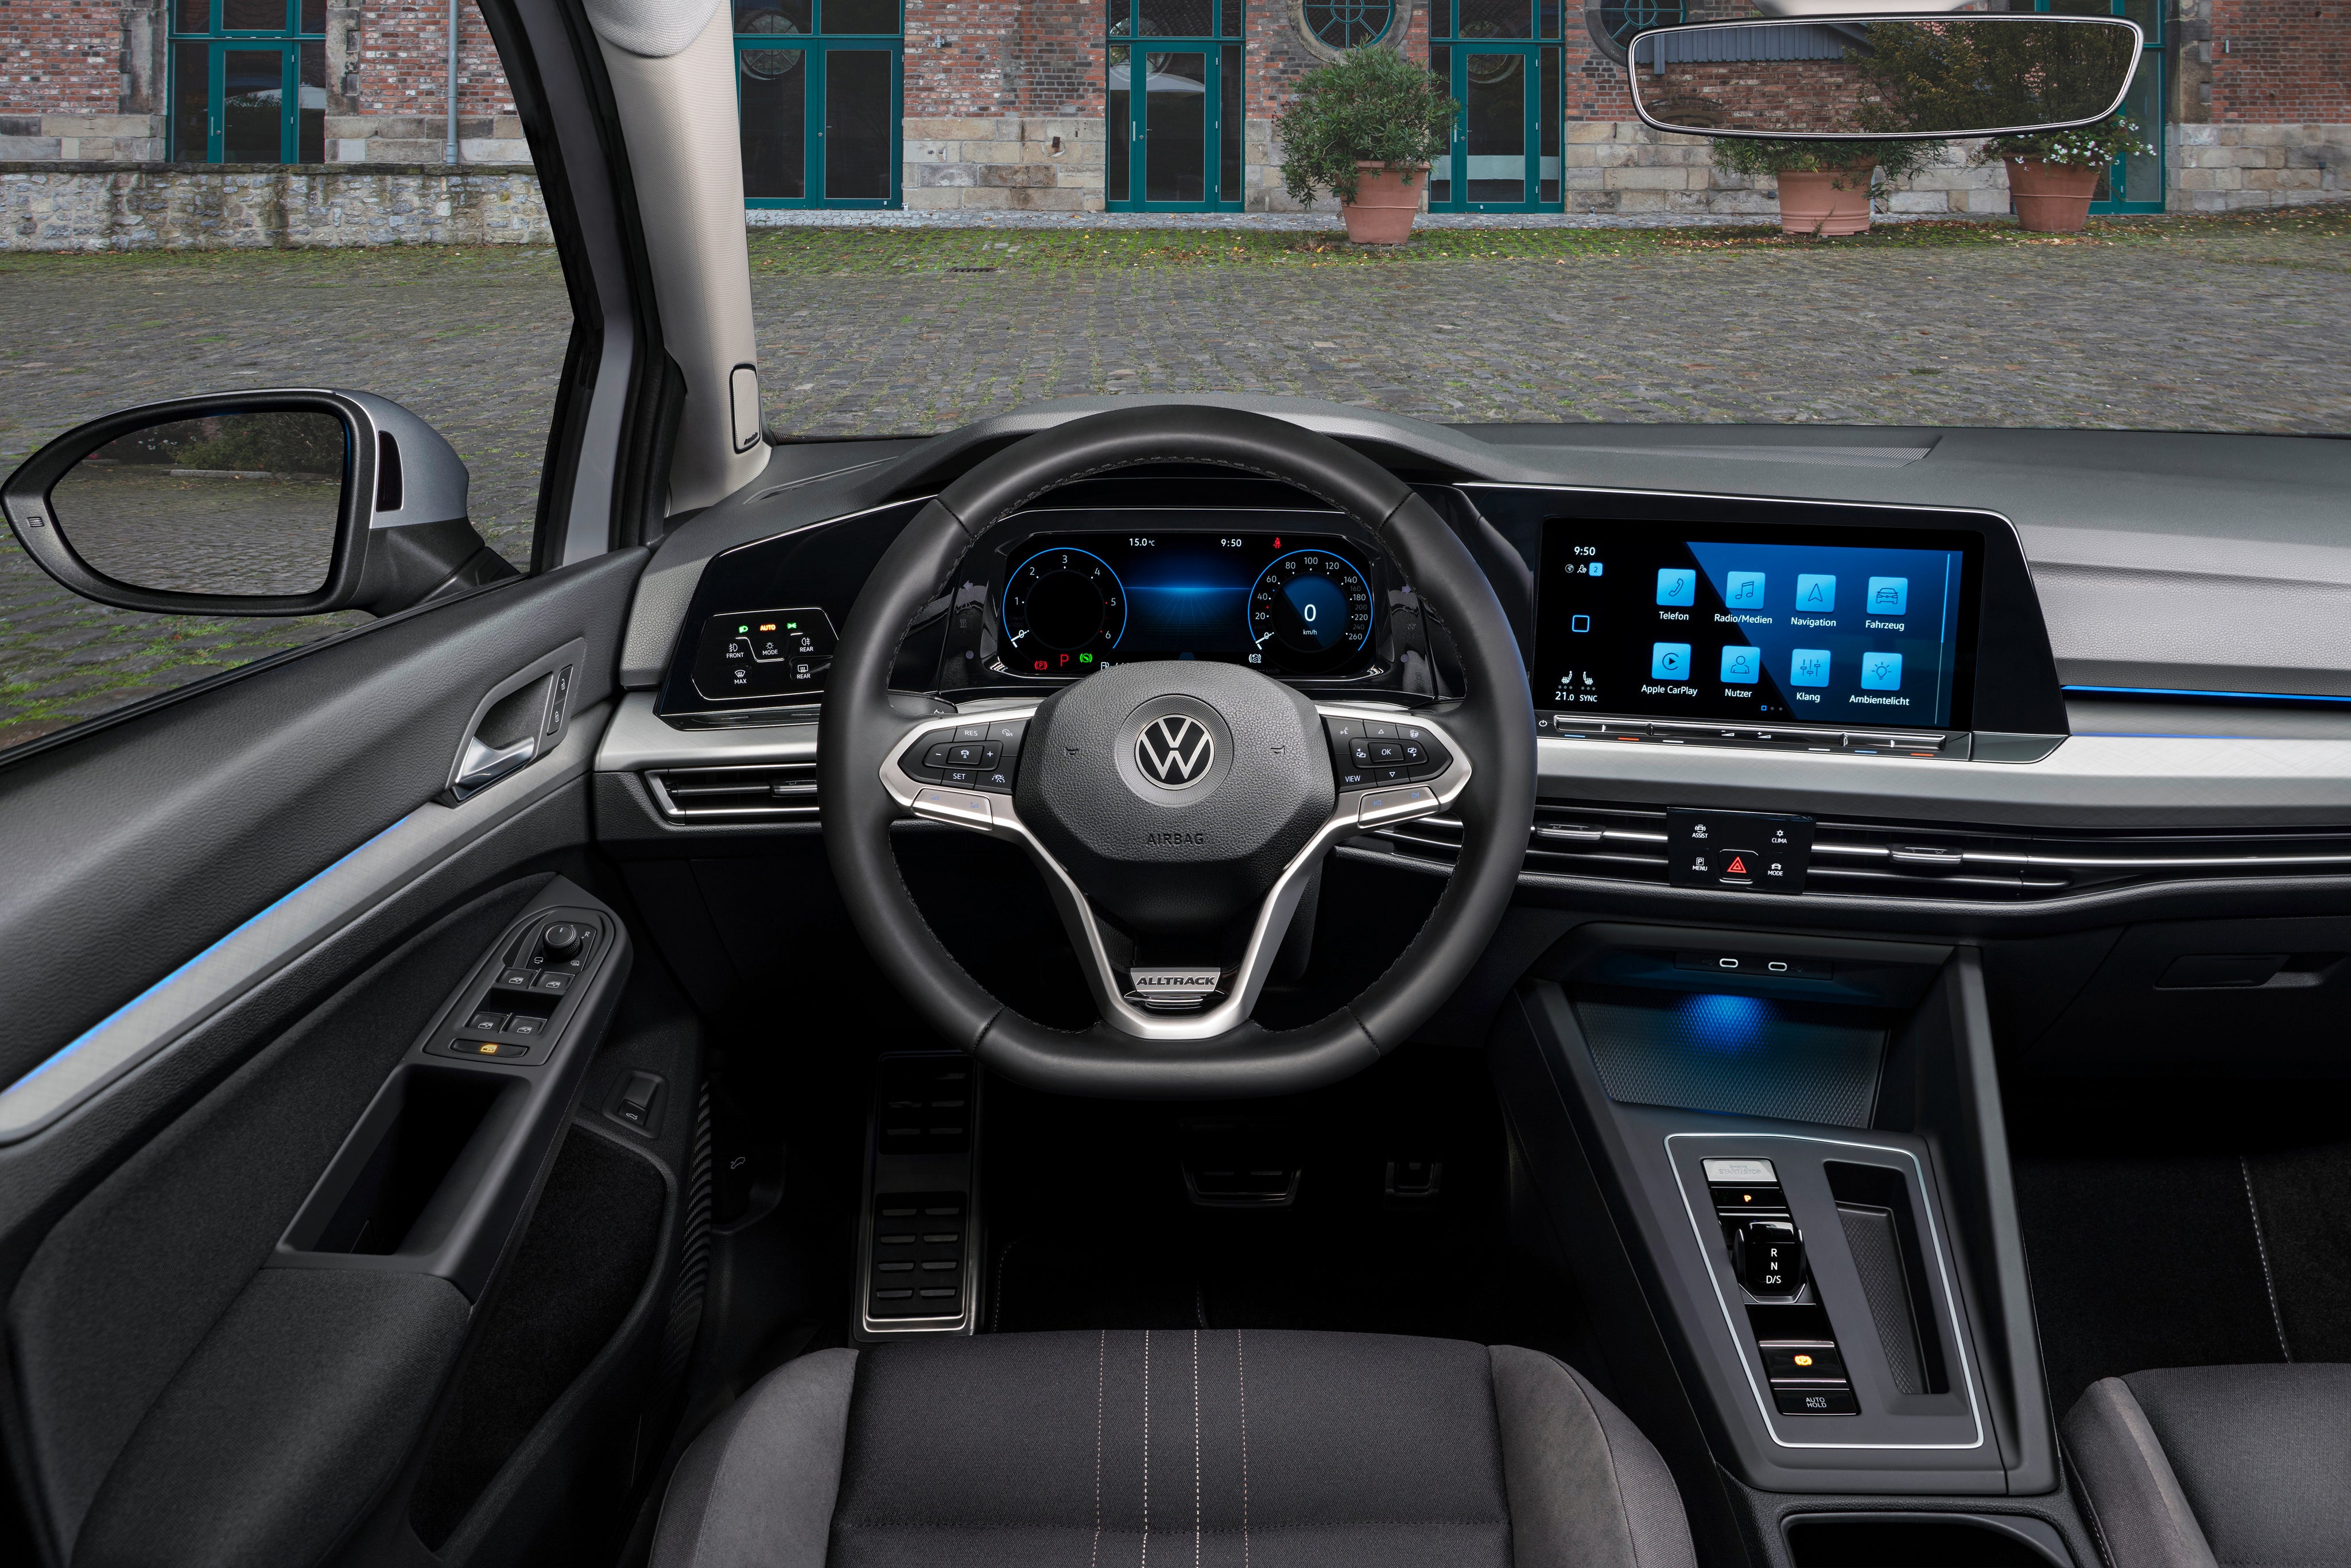 Interior is much like a standard Volkswagen Golf's – including that frustrating infotainment system